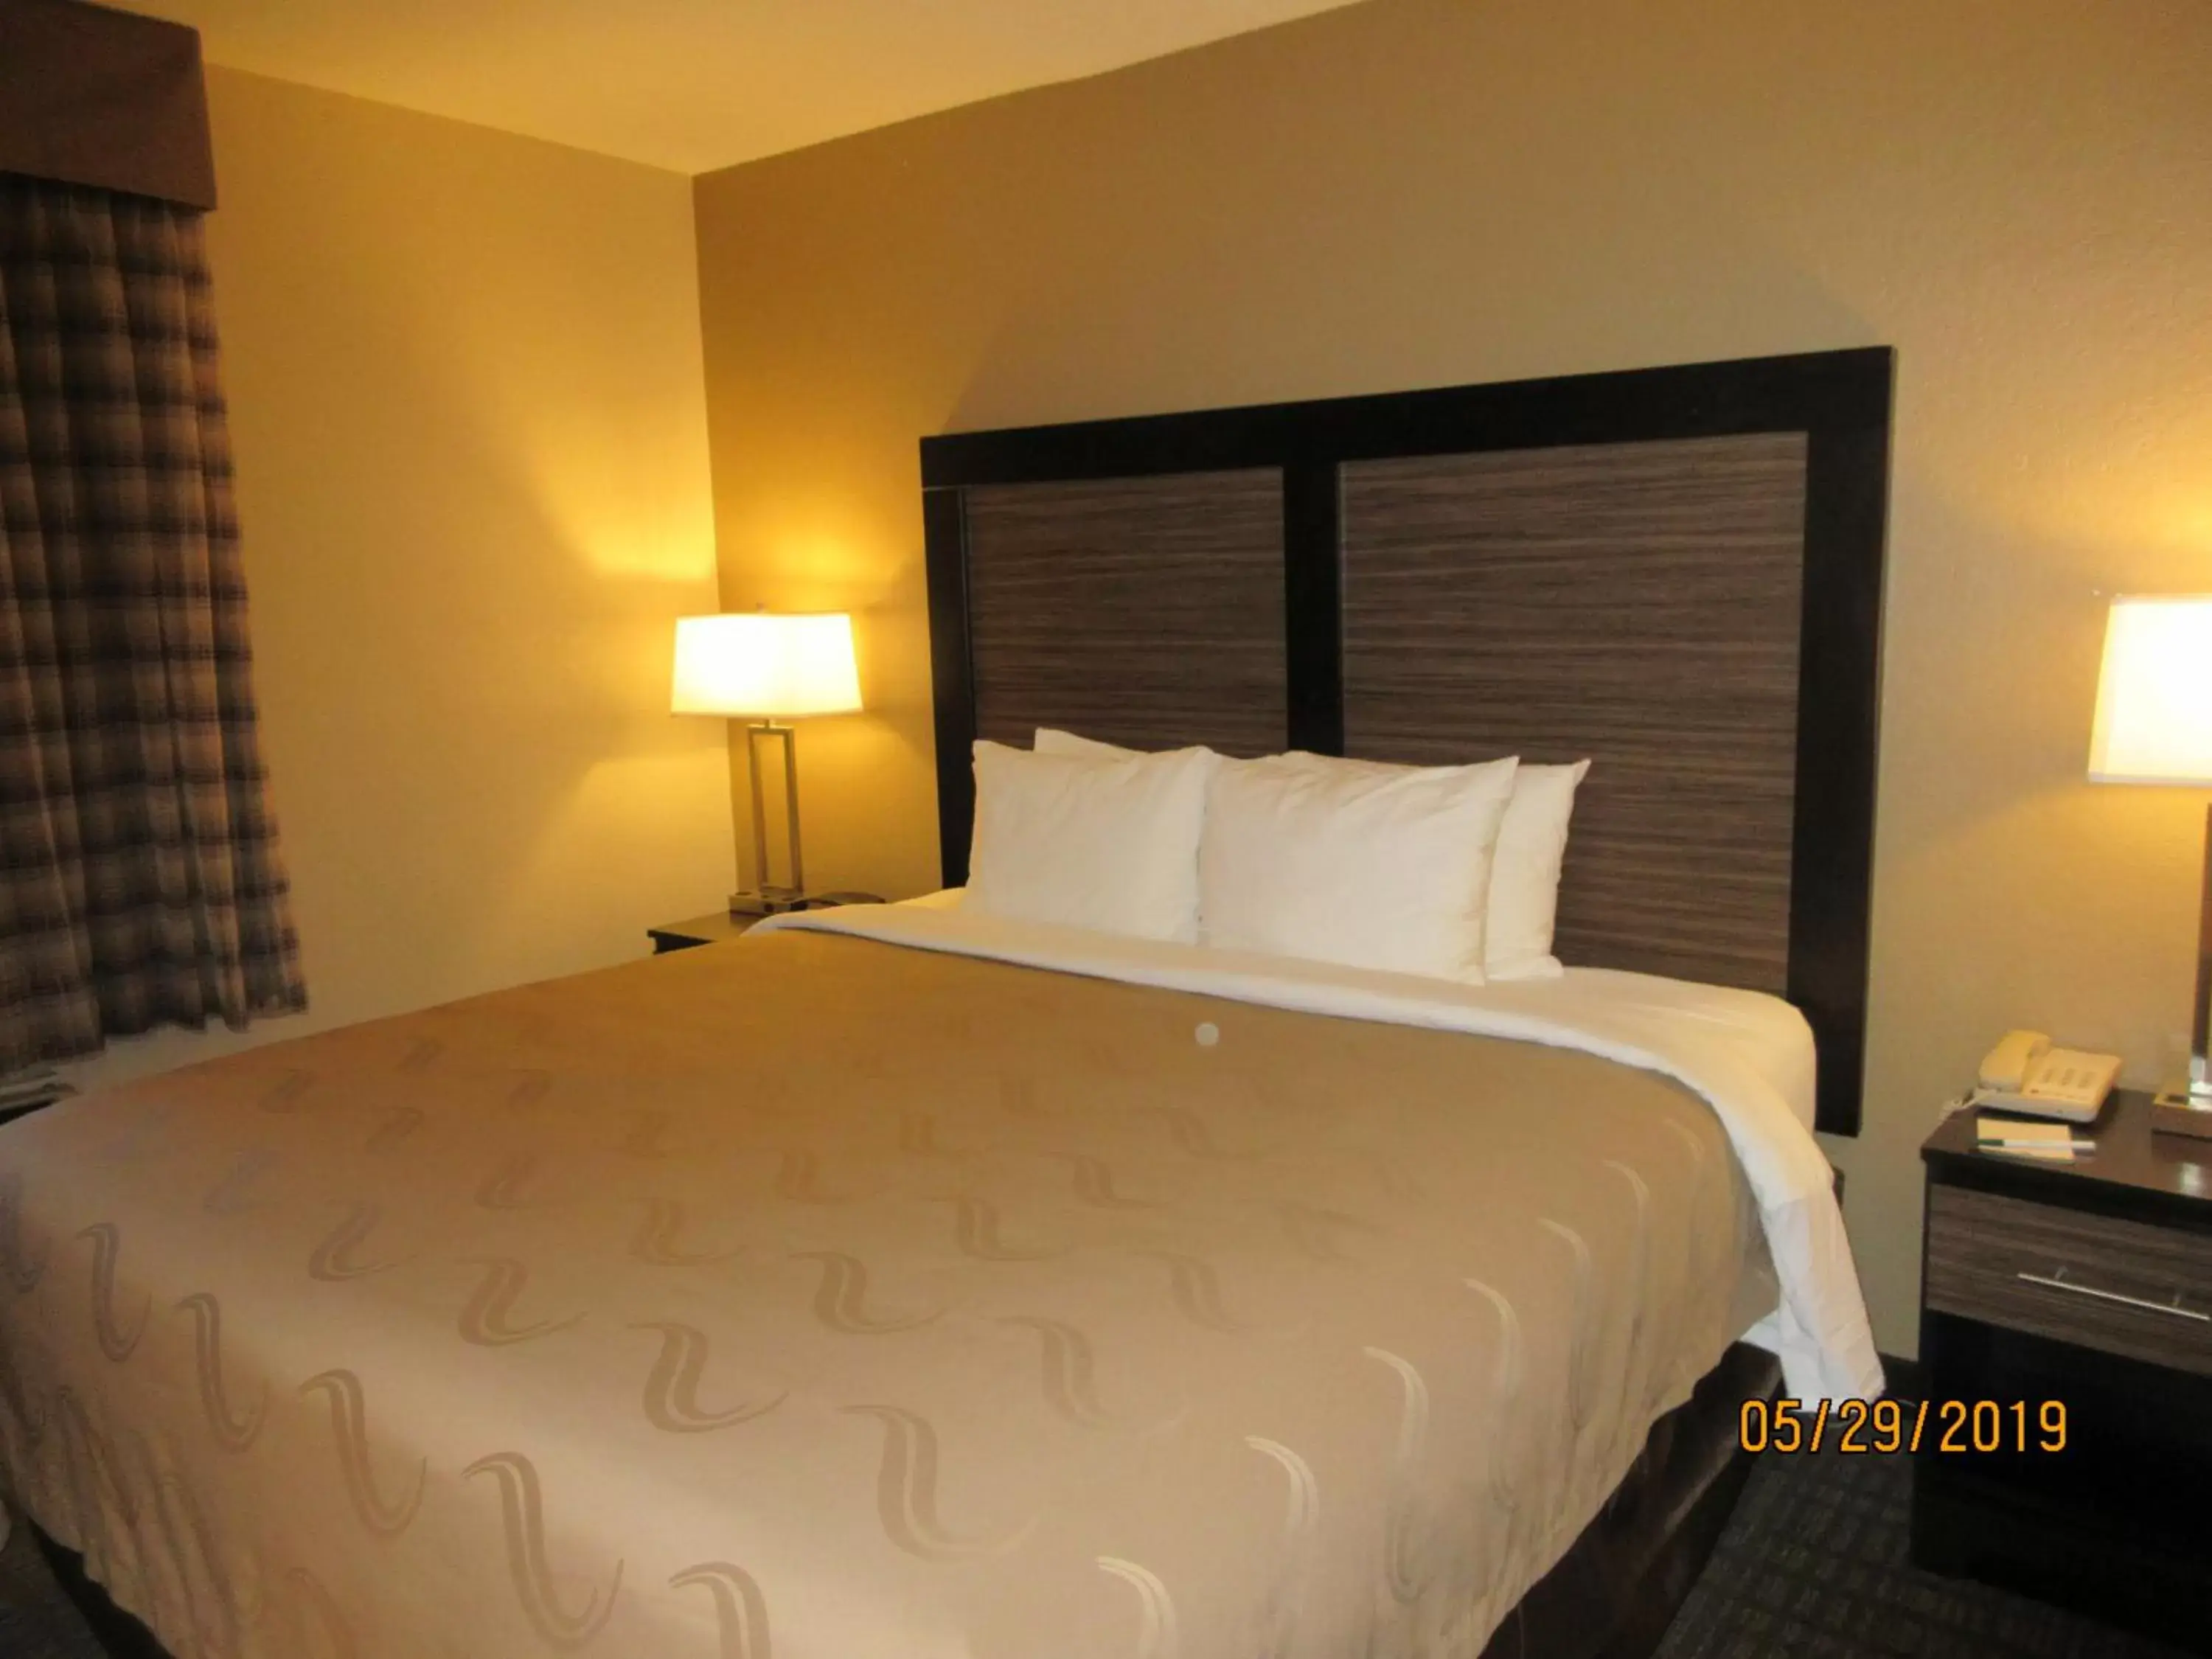 King Room in Quality Inn - Tucson Airport